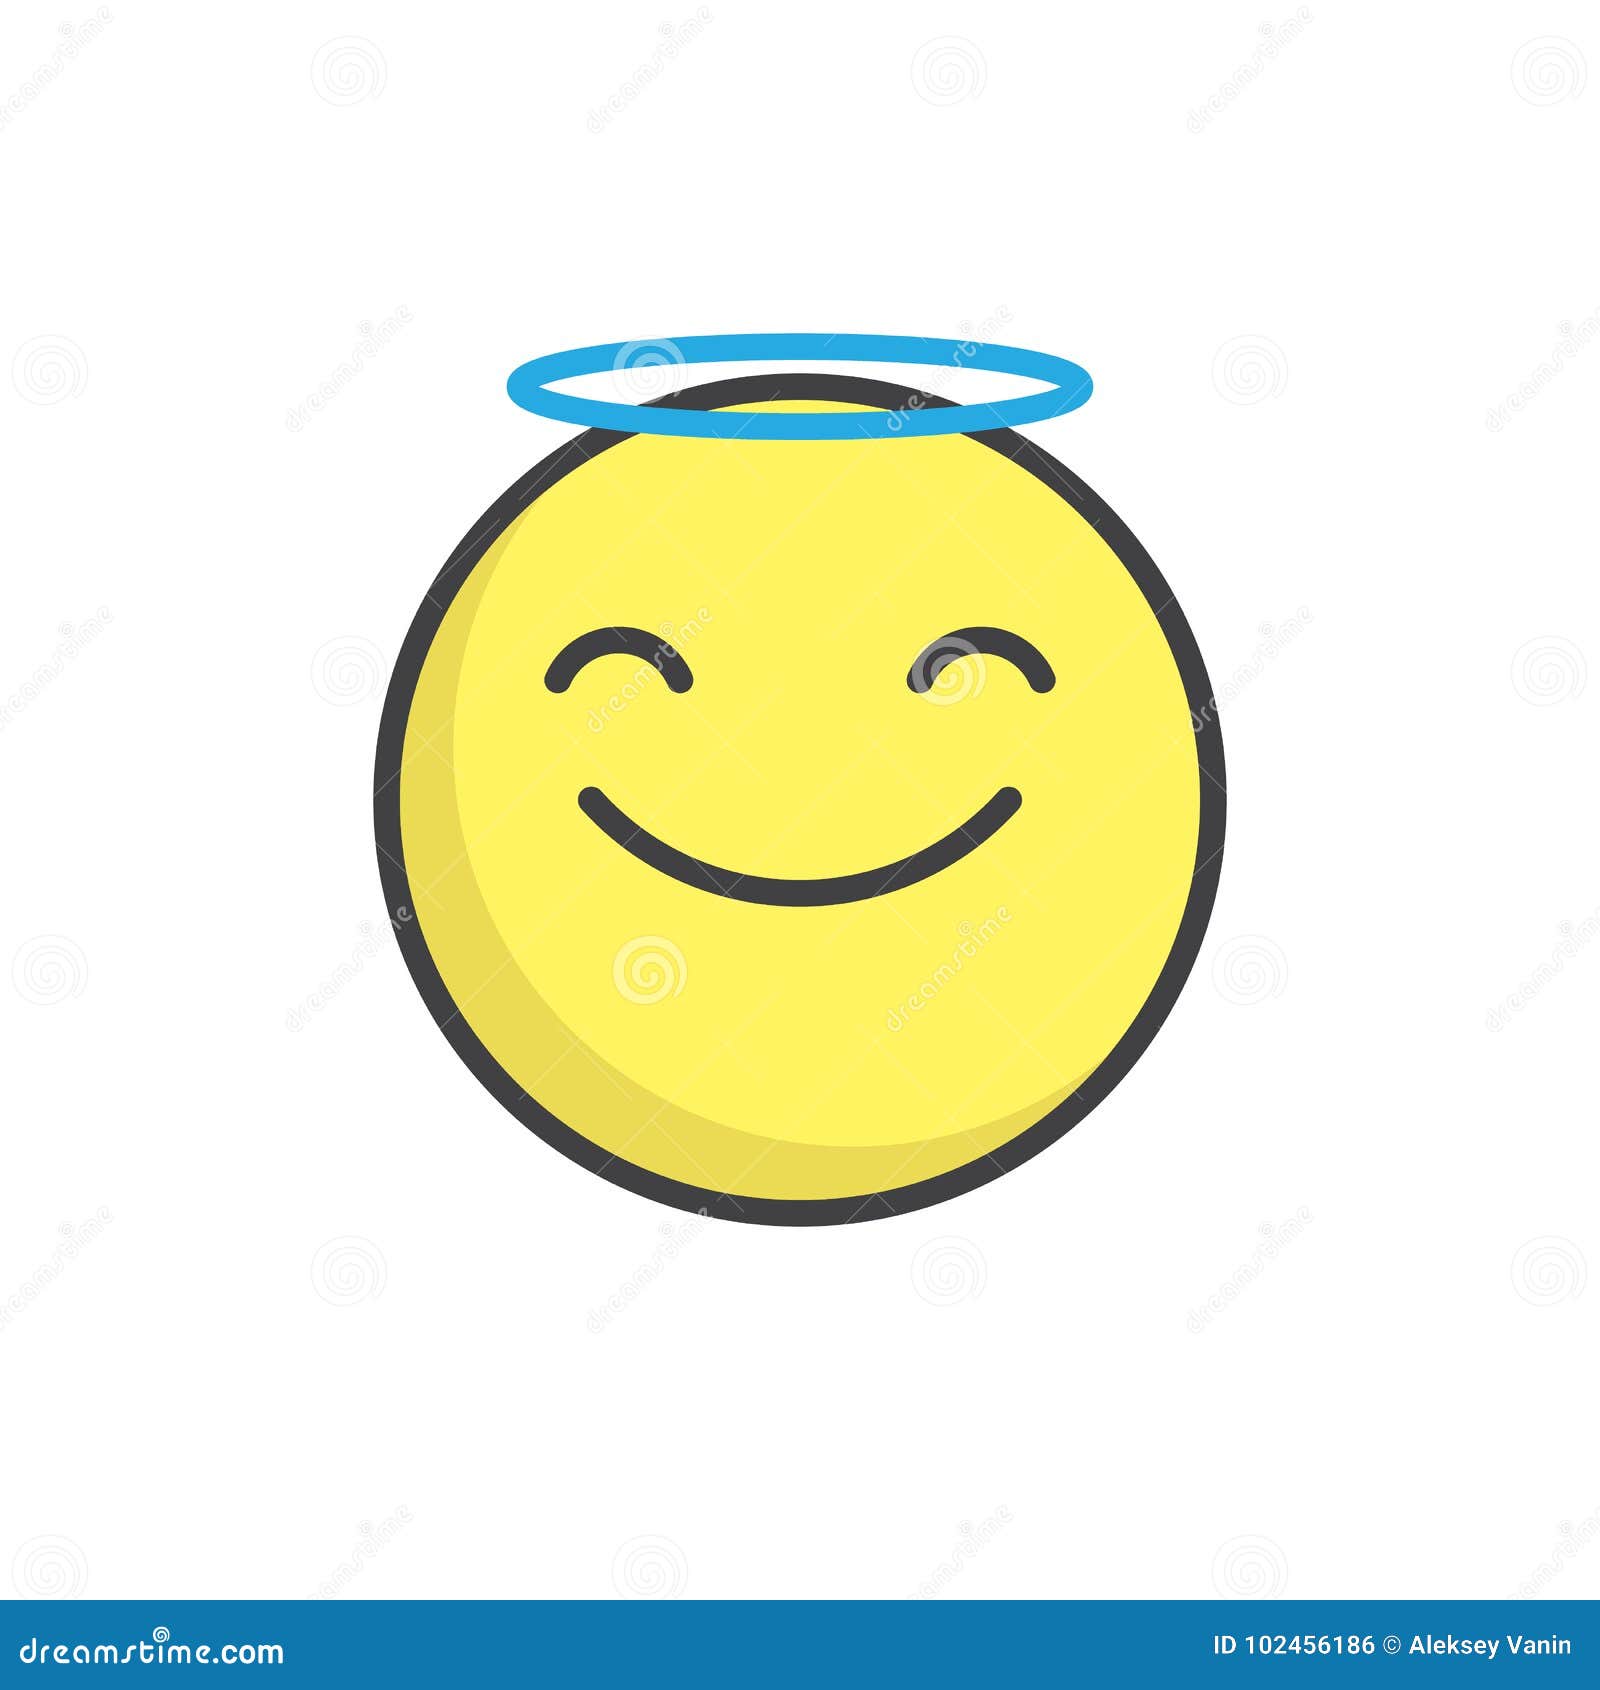 Crying Emoji Merch & Gifts for Sale | Redbubble